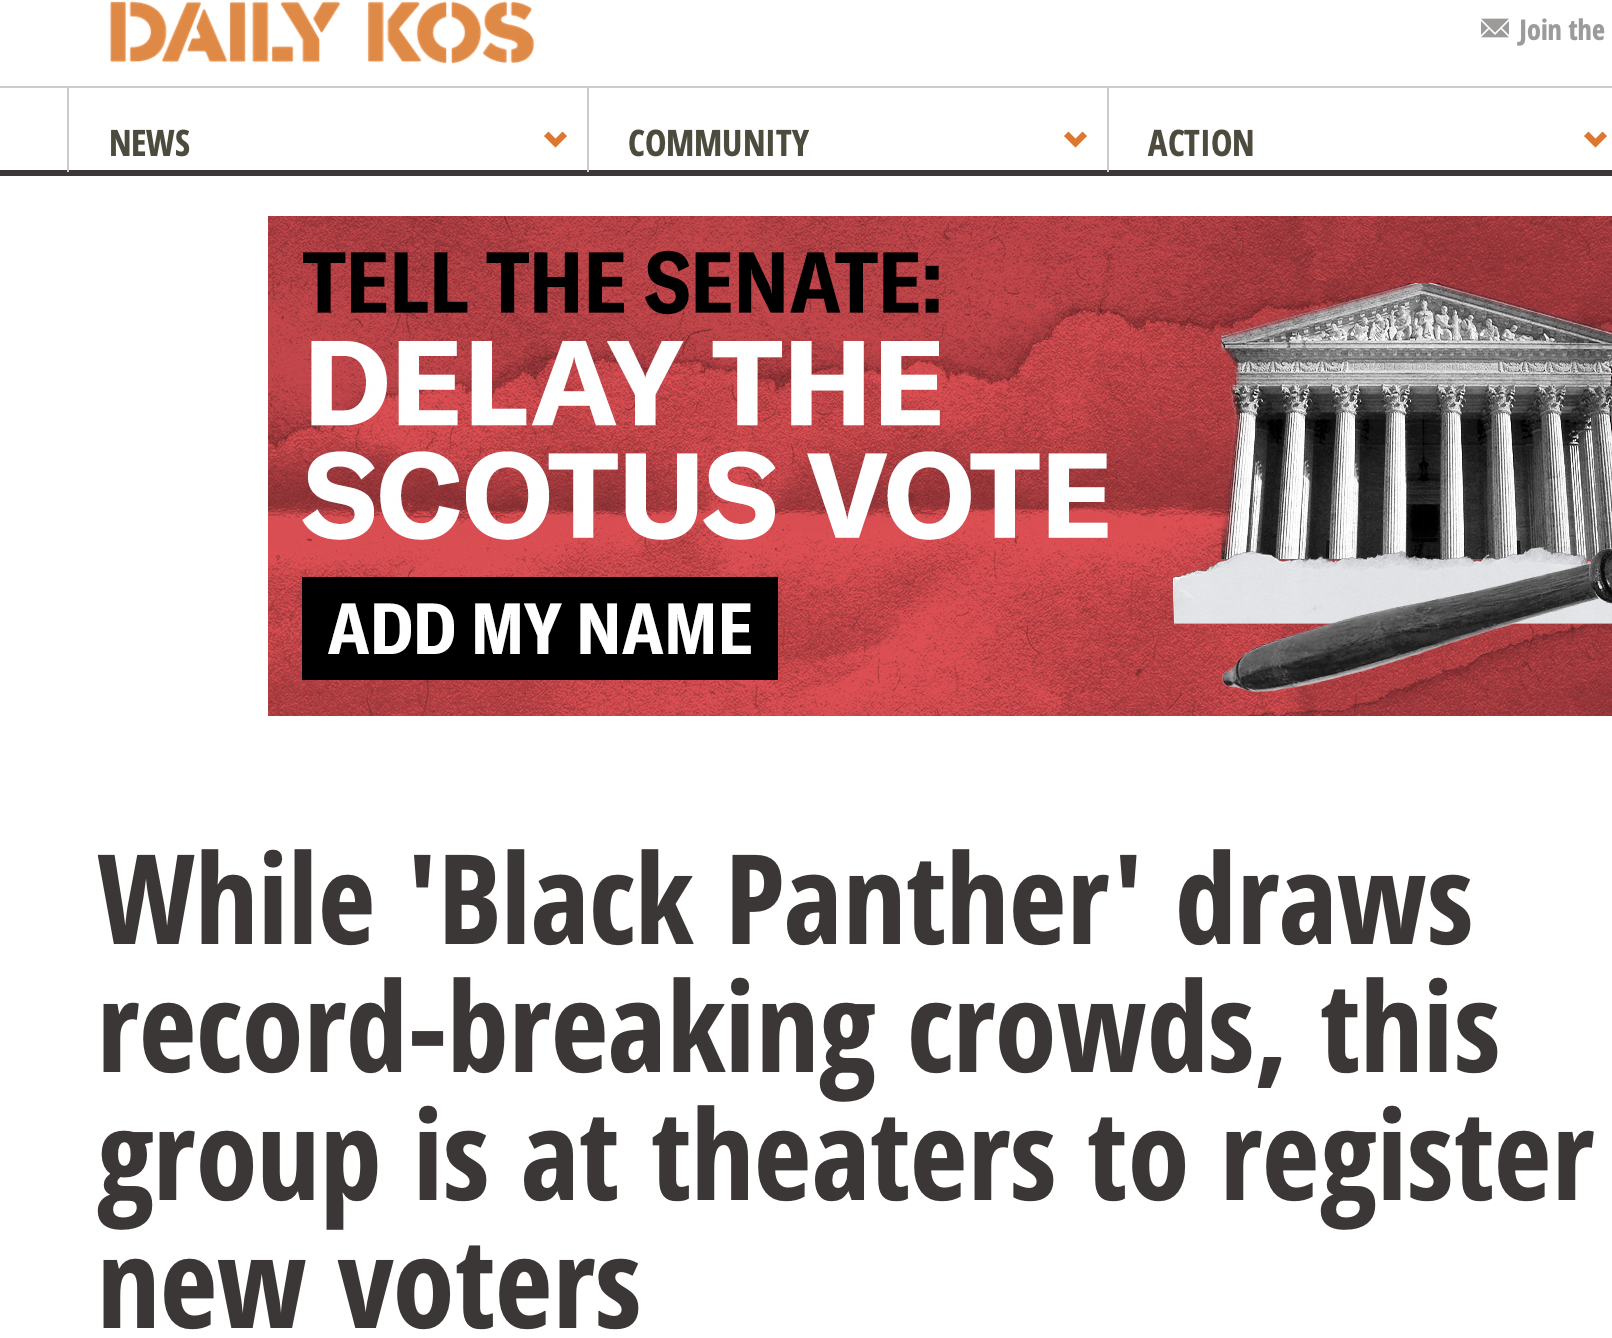 While ‘Black Panther’ draws record-breaking crowds, this group is at theaters to register new voters